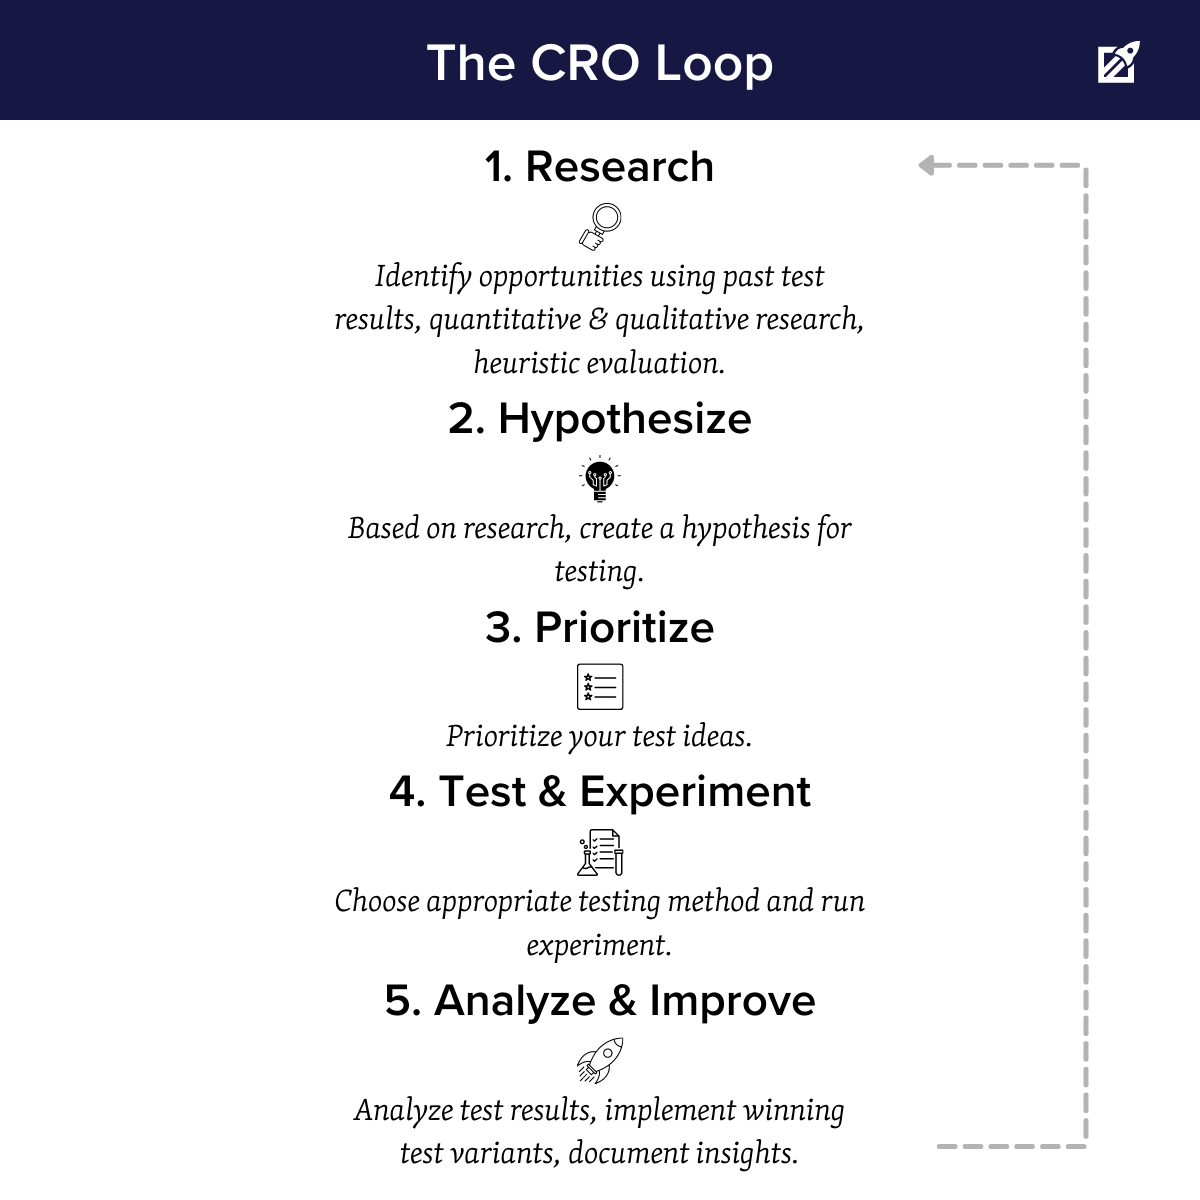 5 steps in the CRO Process